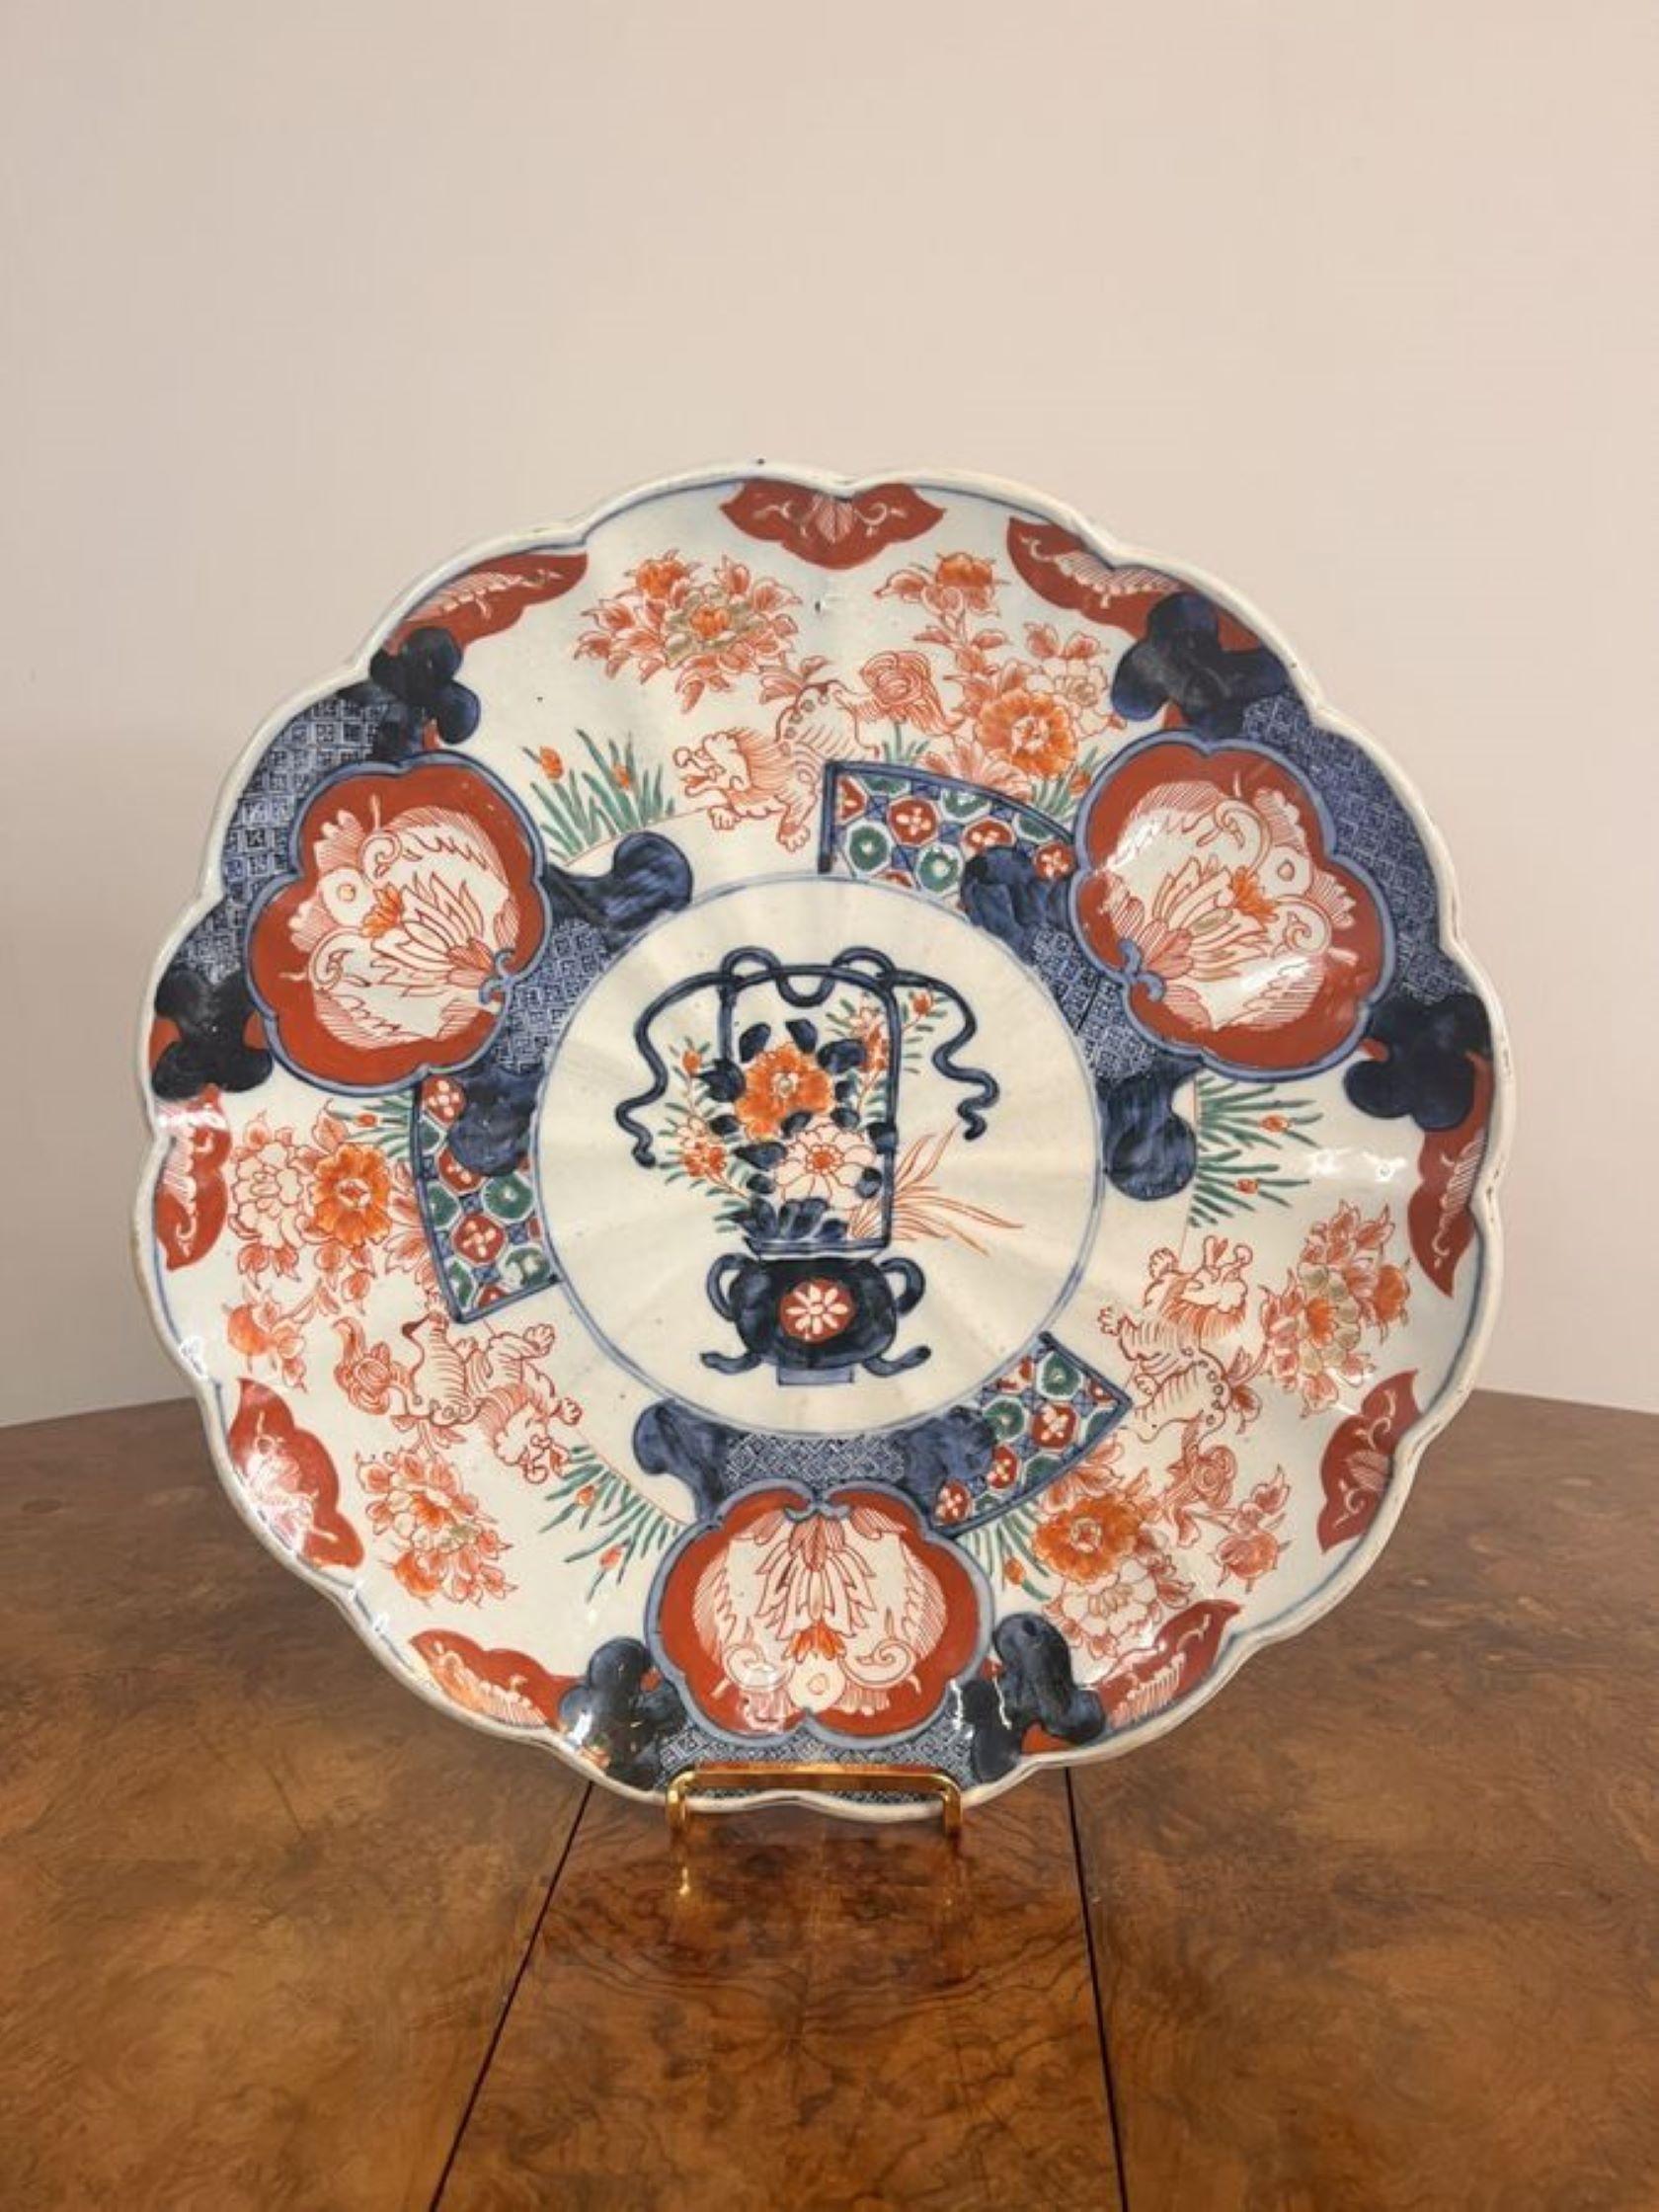 Quality antique Japanese imari plate, having a quality antique Japanese imari plate decorated with a basket of flowers to the centre surrounded by hand painted flowers, leaves, trees and patterns in blue, red, green and white colours.

D. 1900